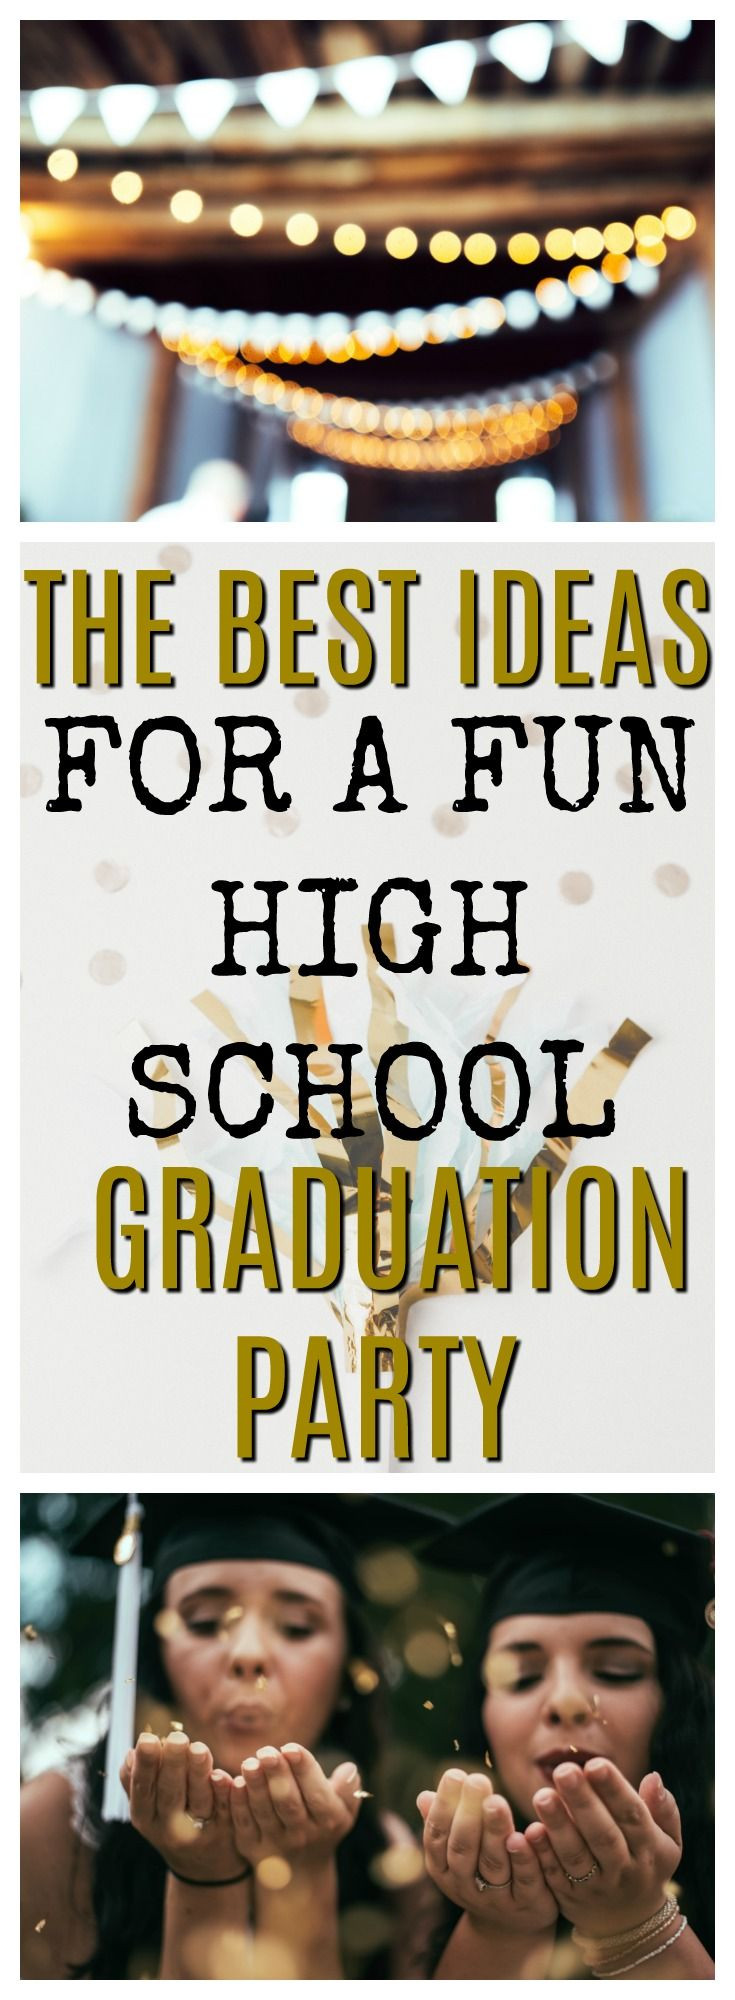 High School Graduation Party Game Ideas
 Graduation Party Ideas 2020 How to Celebrate [step by